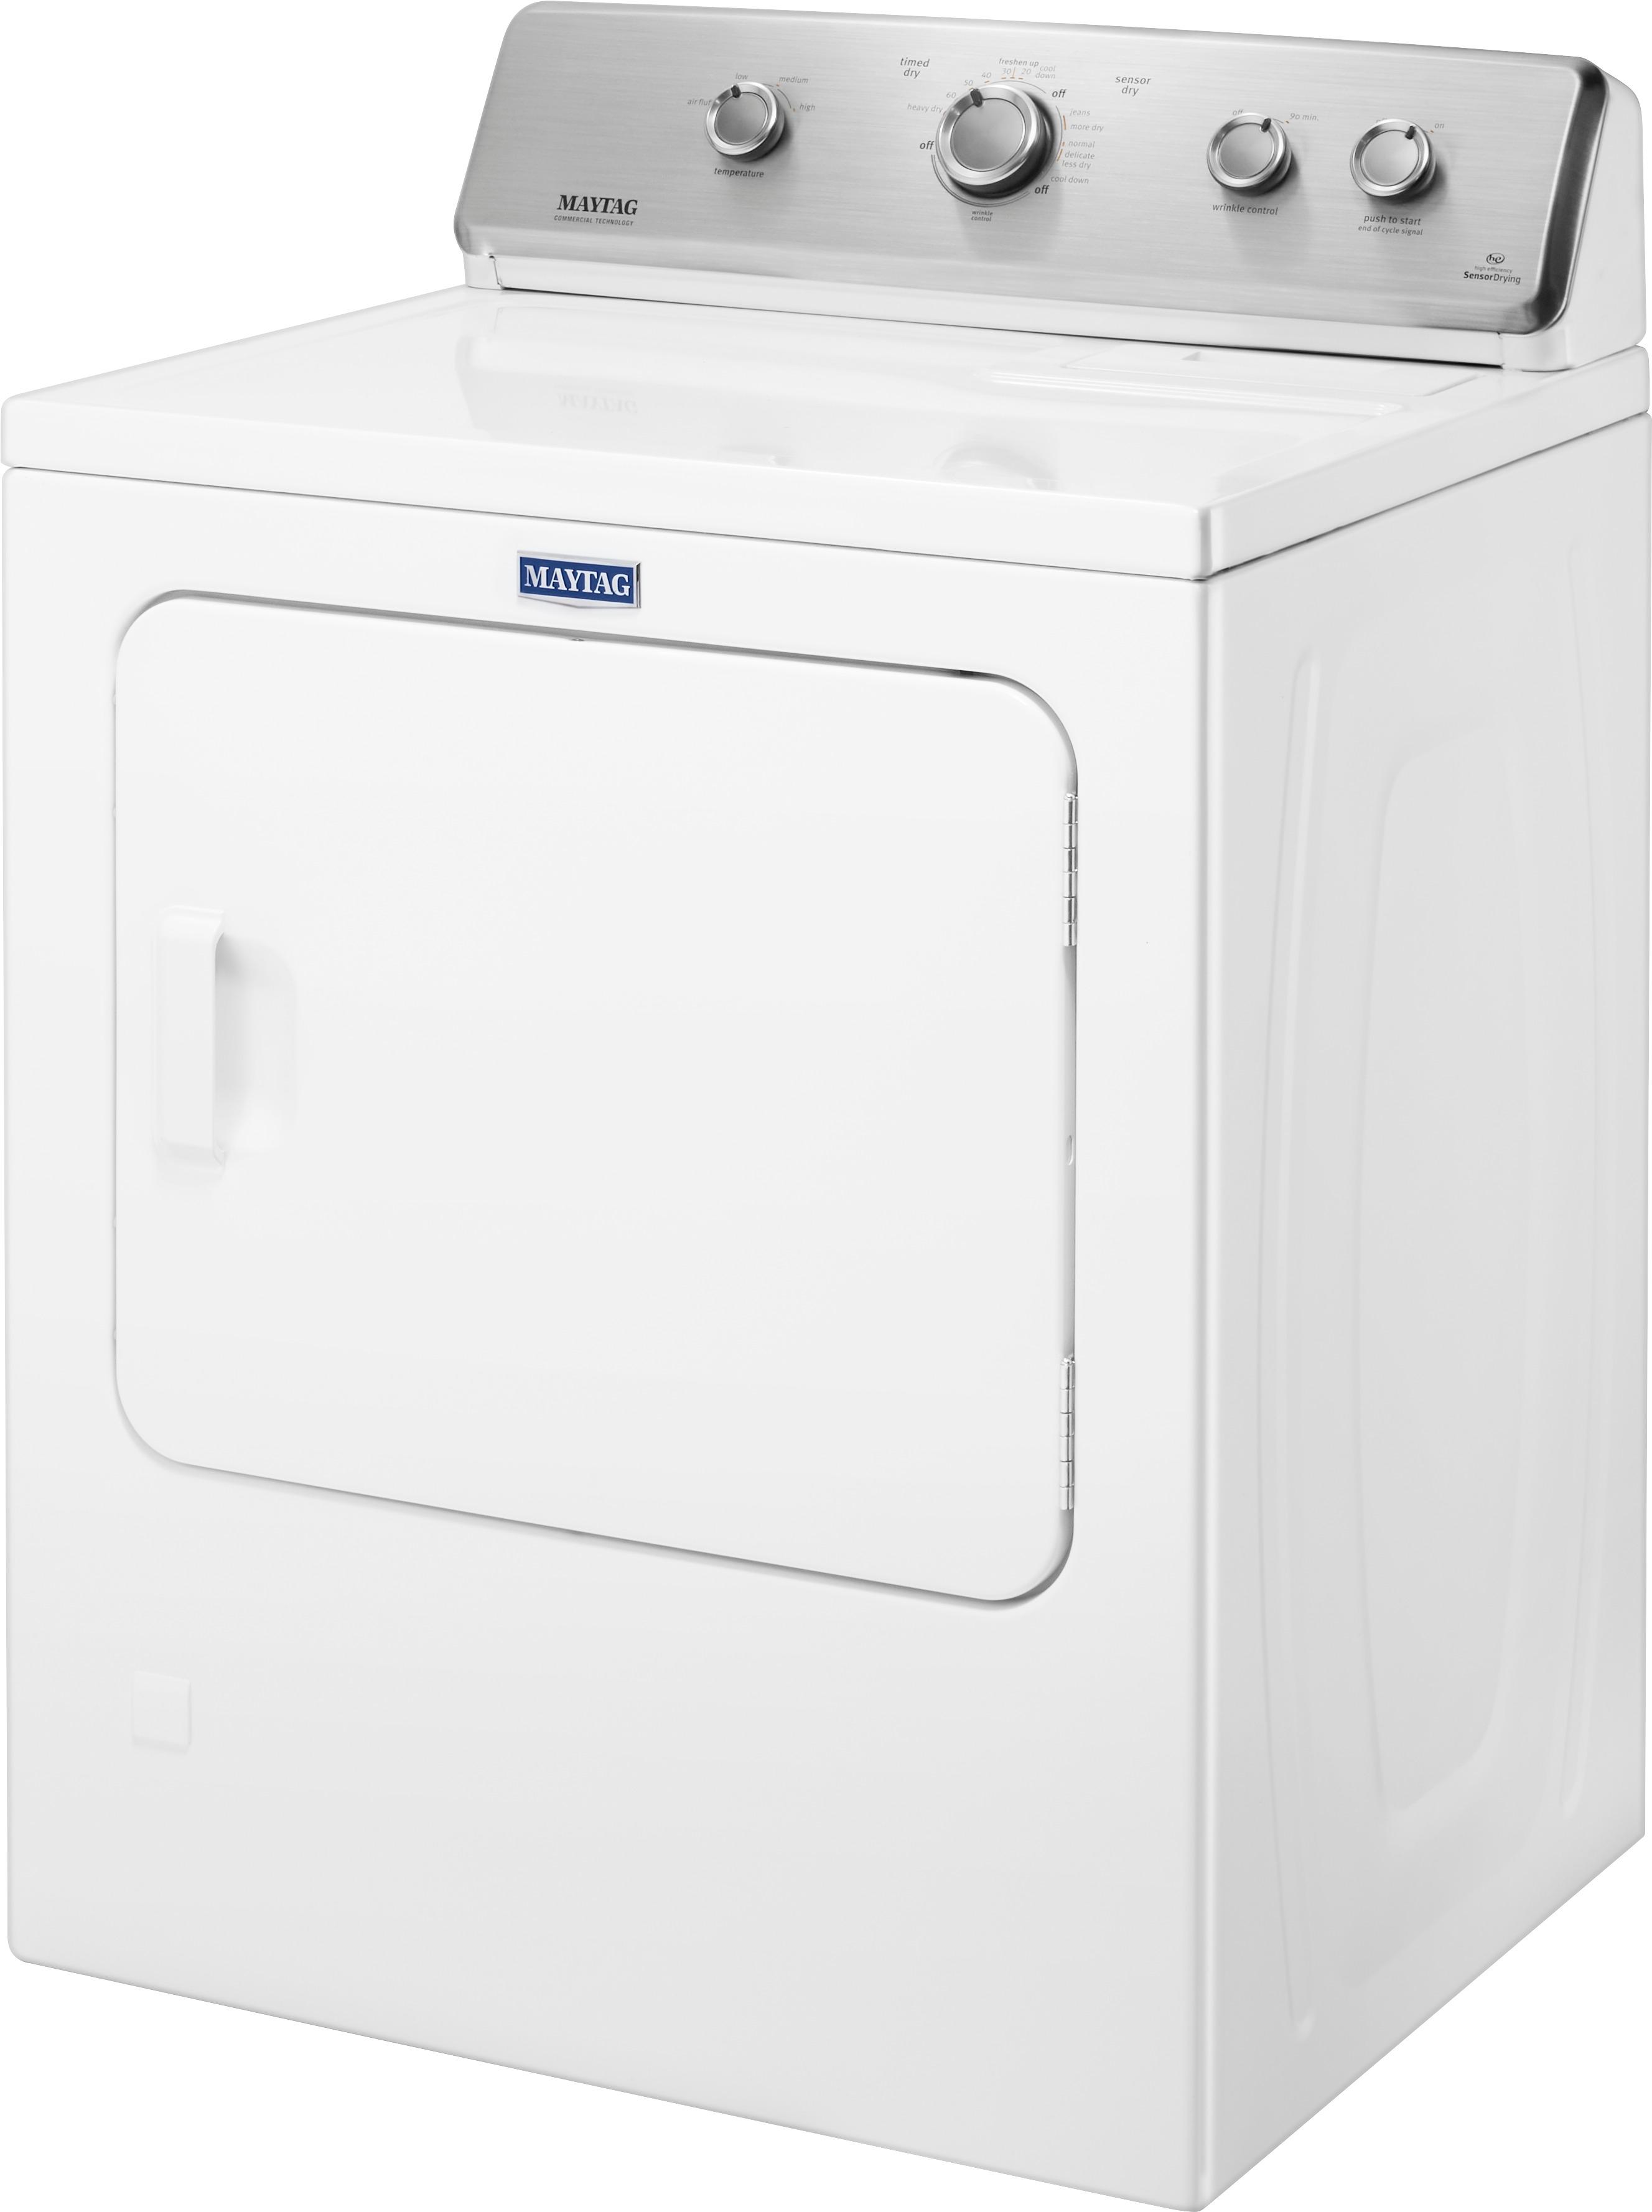 Left View: Maytag - 7 Cu. Ft. Electric Dryer with Wrinkle Control Option - White